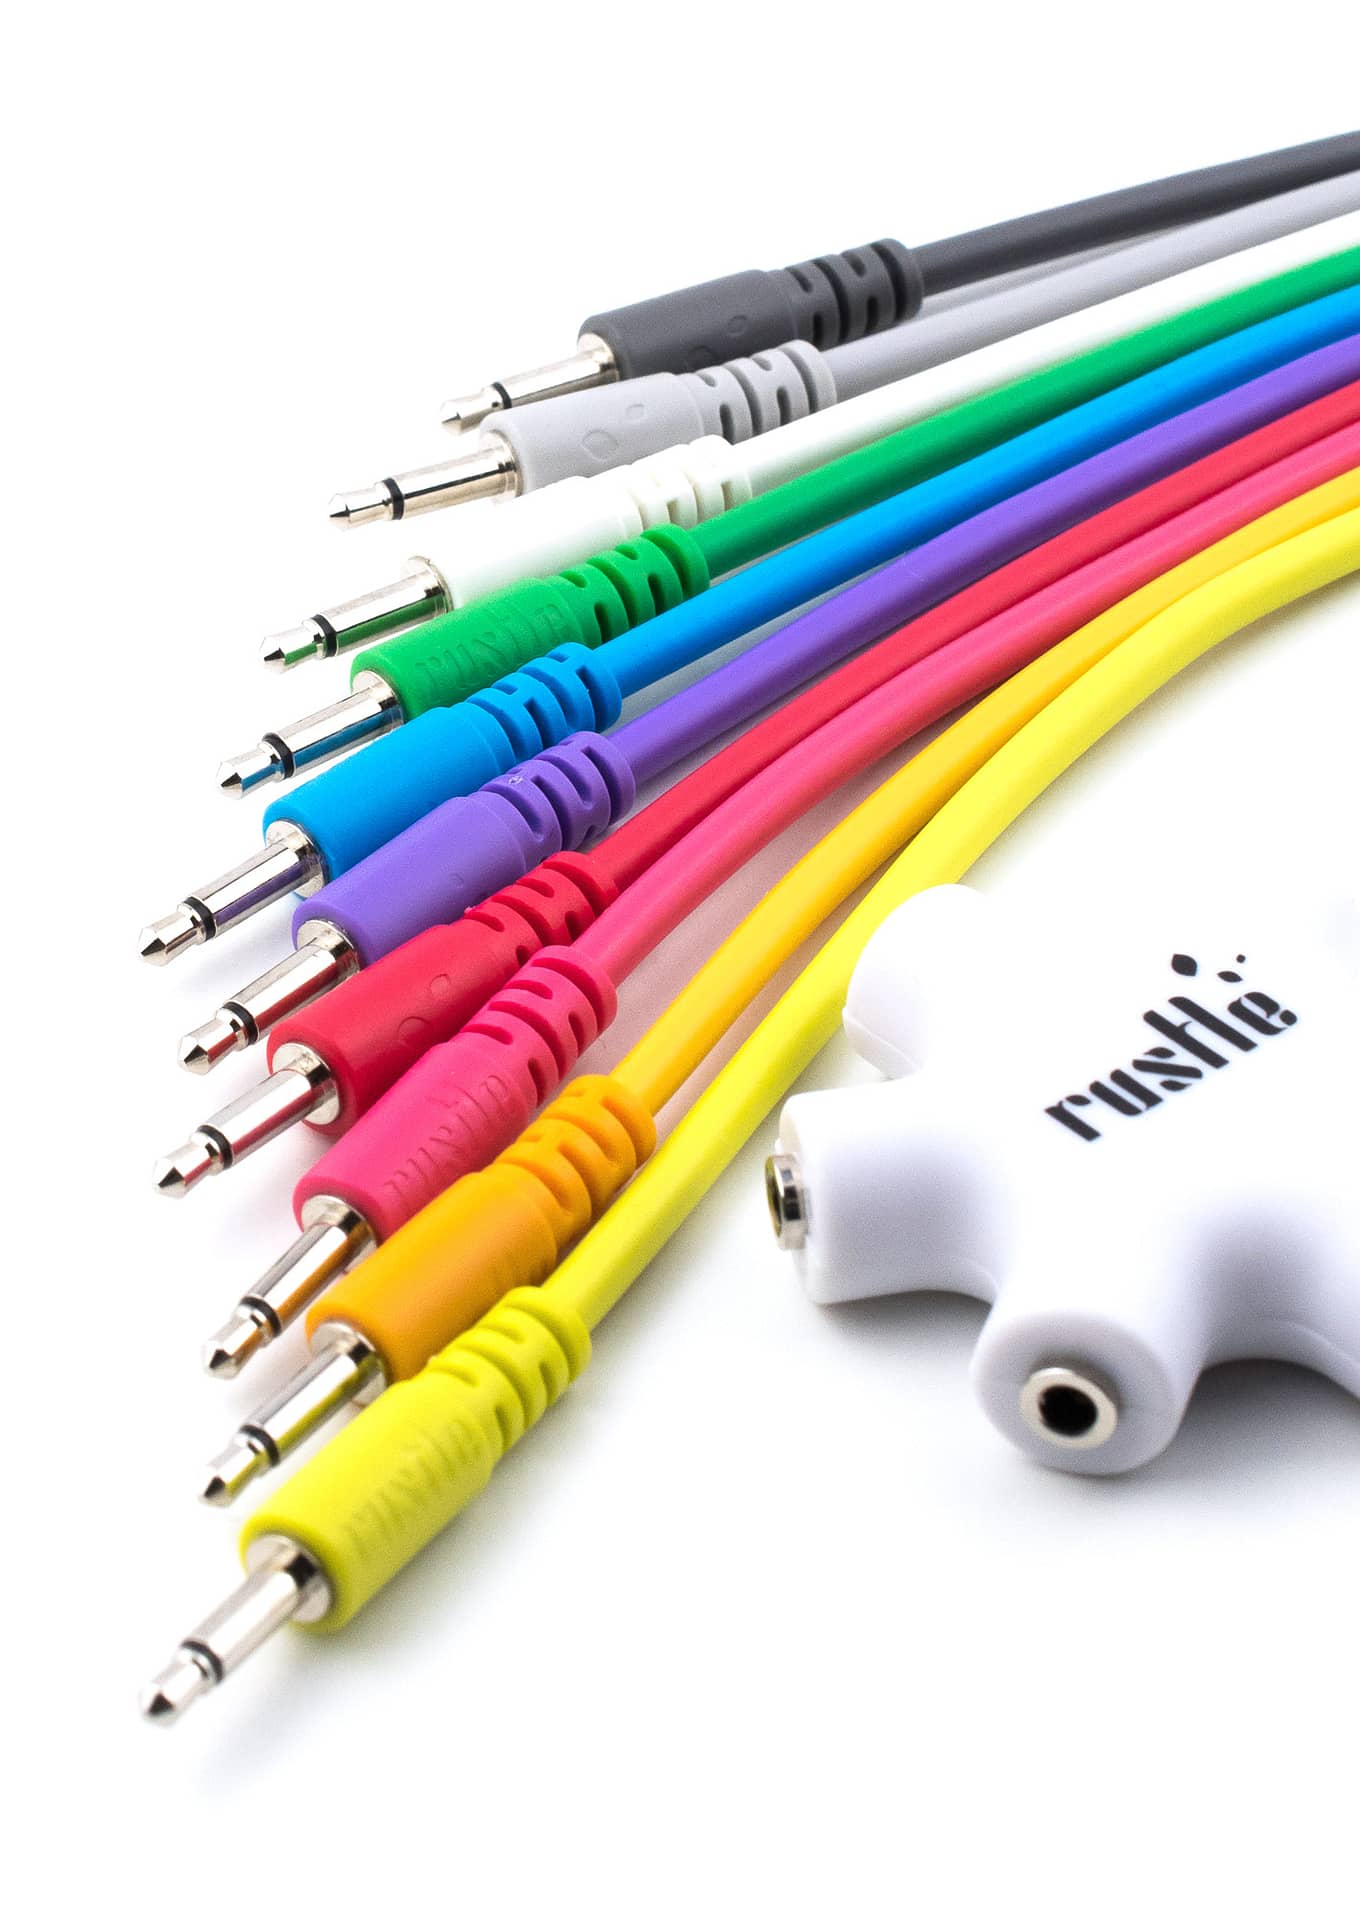 Rustle Eurorack Patch Cables For Modular Synthesisers 10 Pack Free 6 Way Splitter 90 cm